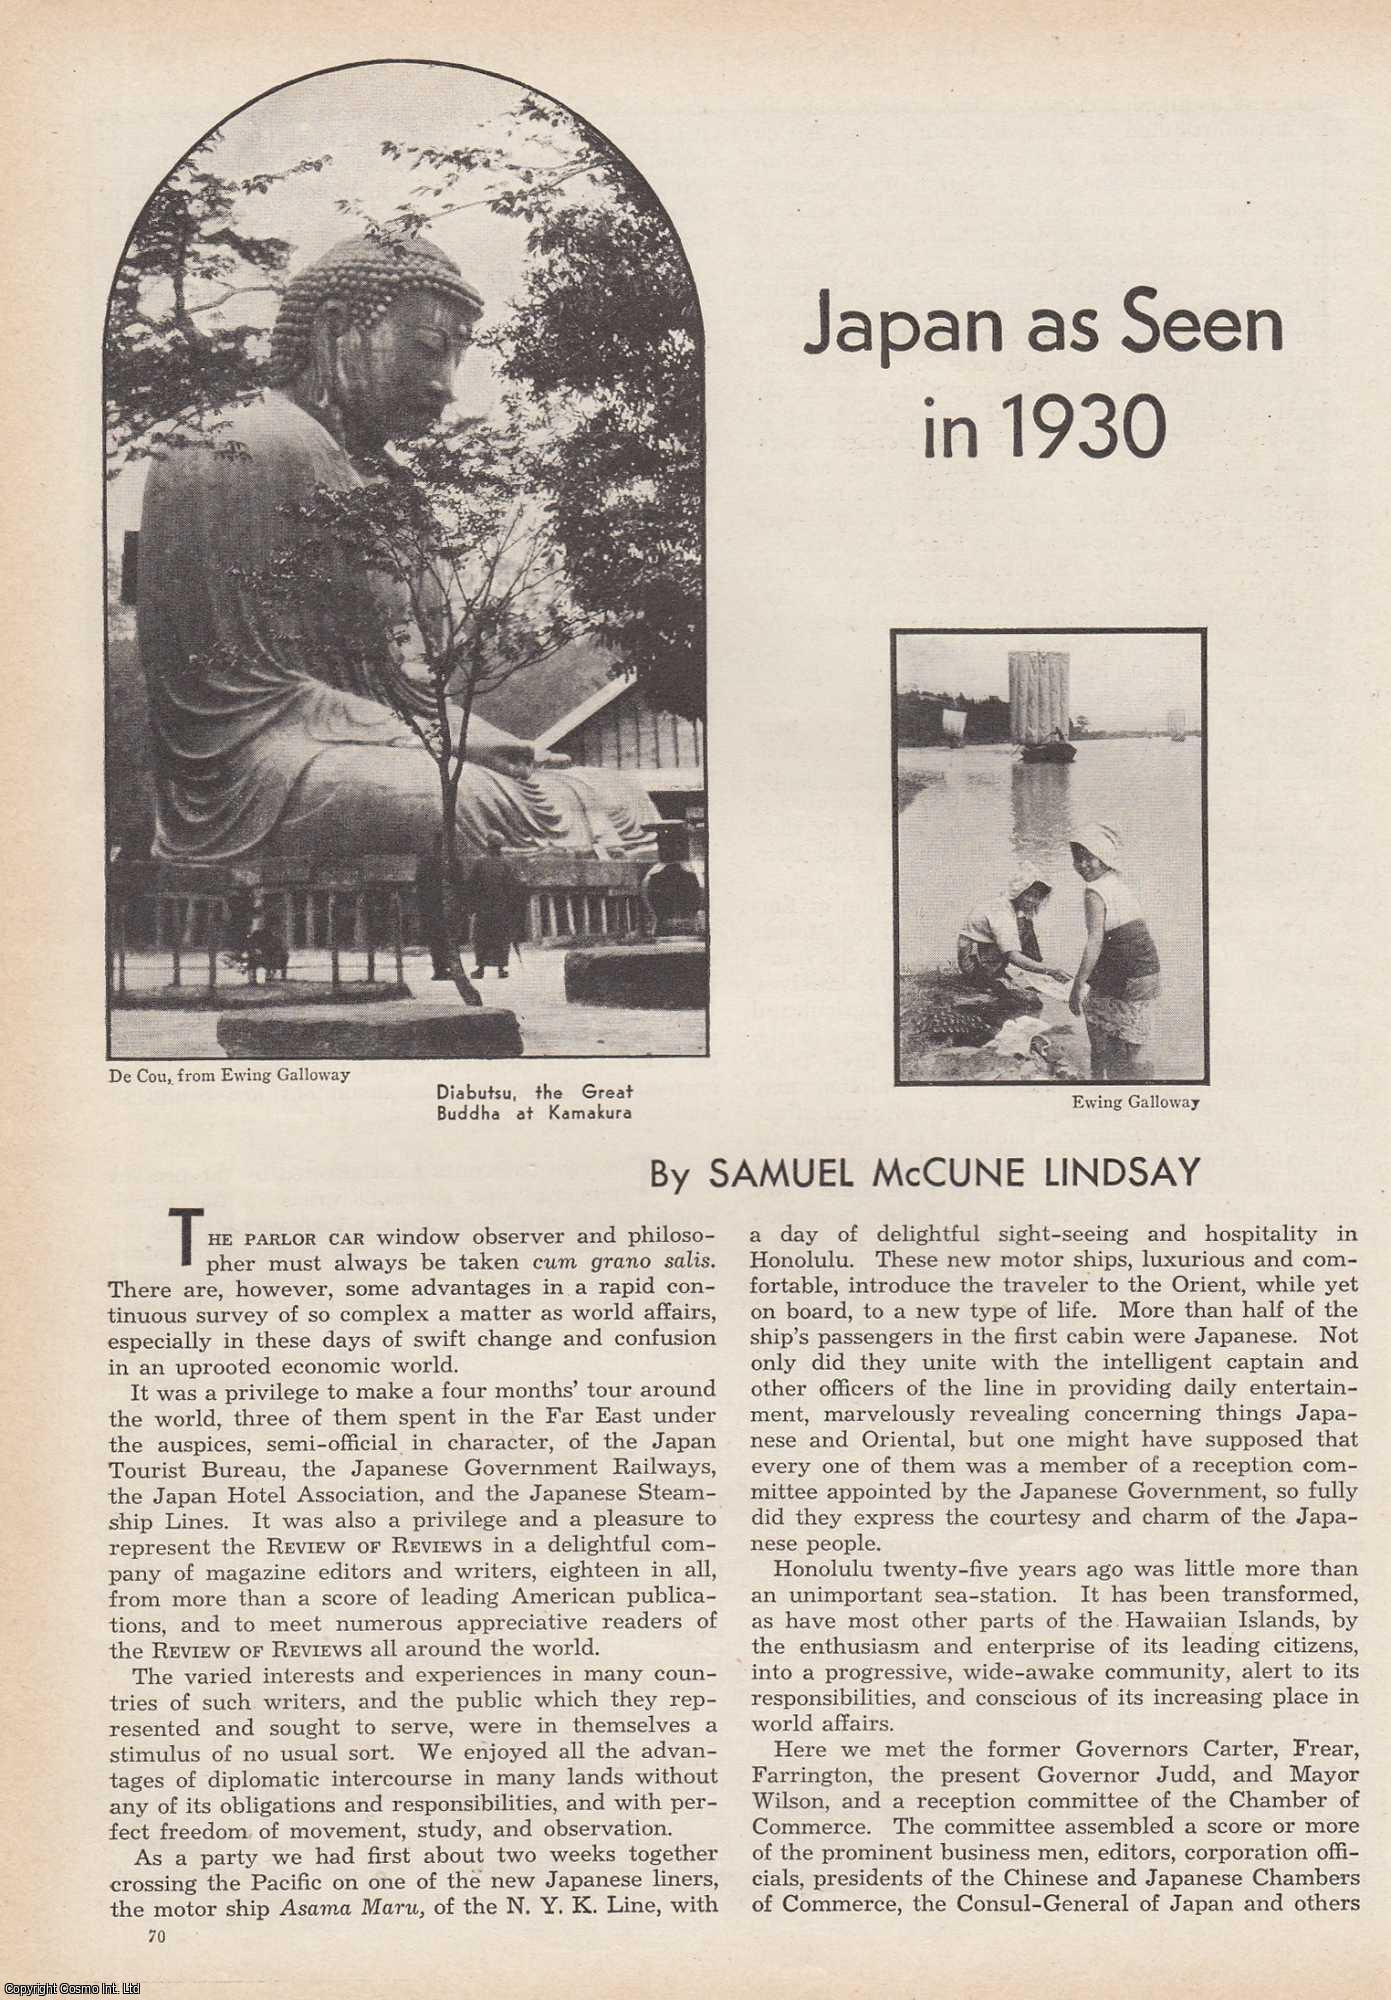 Samuel McCune Lindsay - Japan as Seen in 1930. An original article from the American Review of Reviews, 1930.